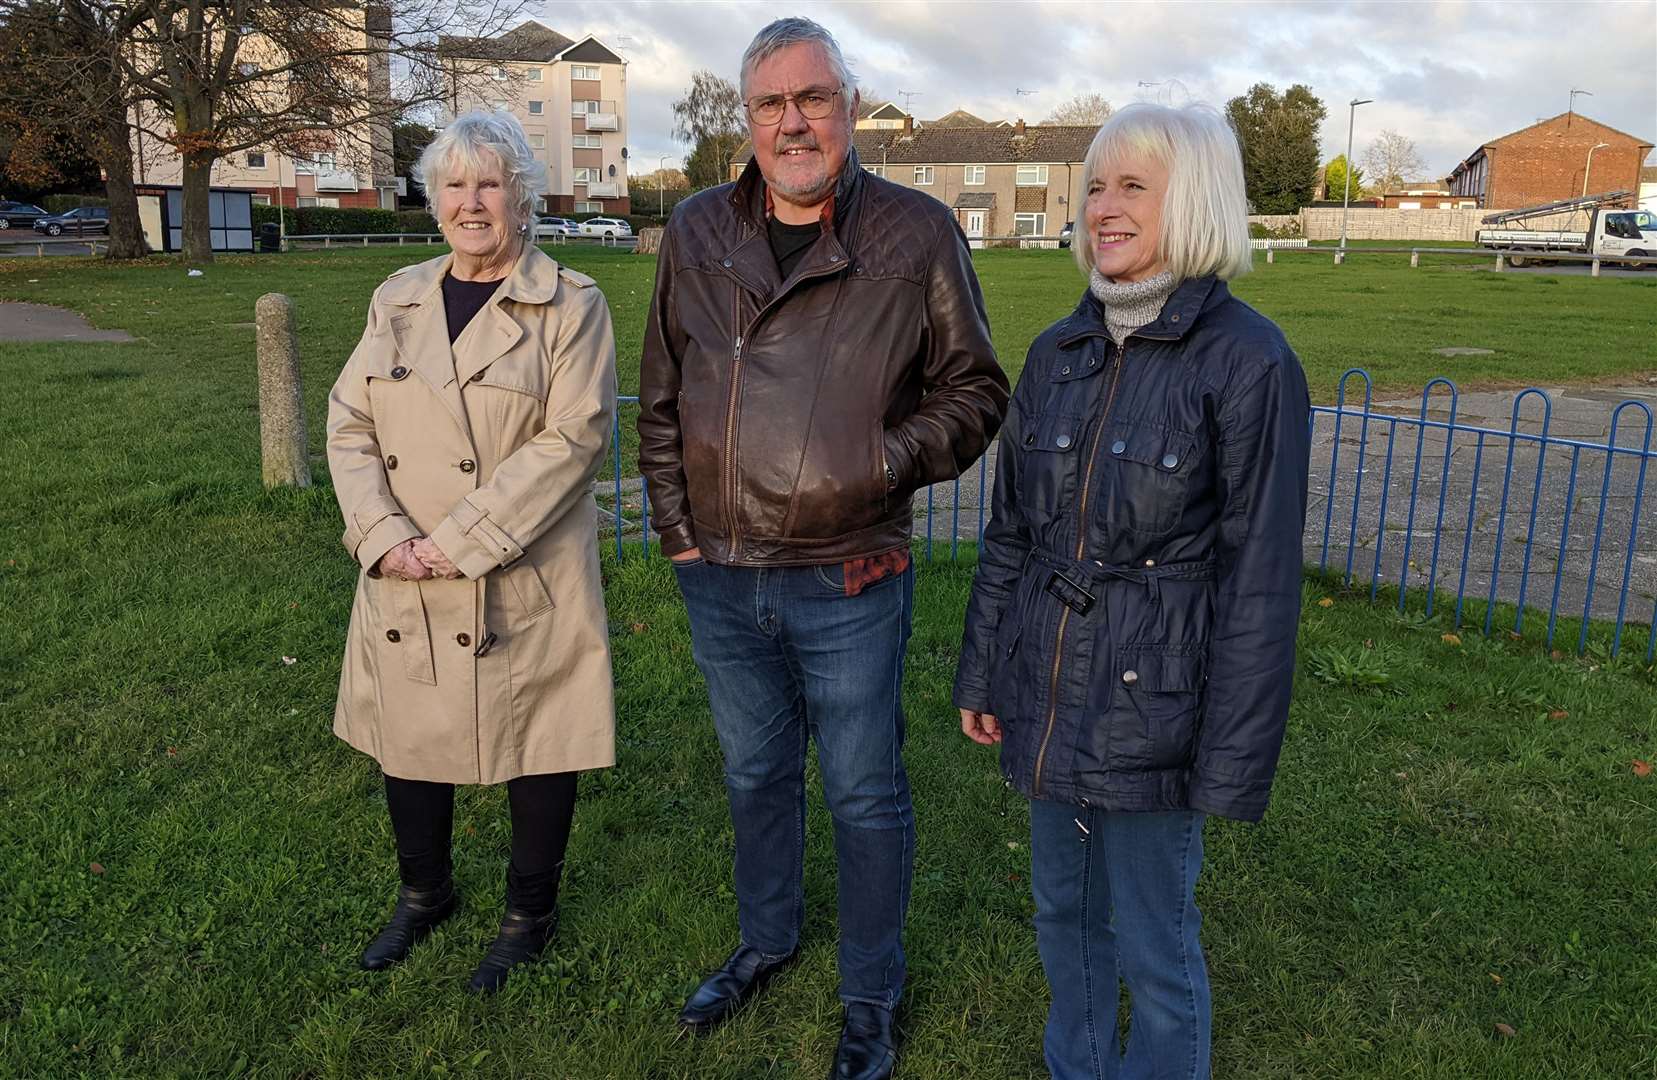 Wendy Pole, Alan Dean and Ann Bayross make up the 'Bockhanger and Bybrook Matters' team